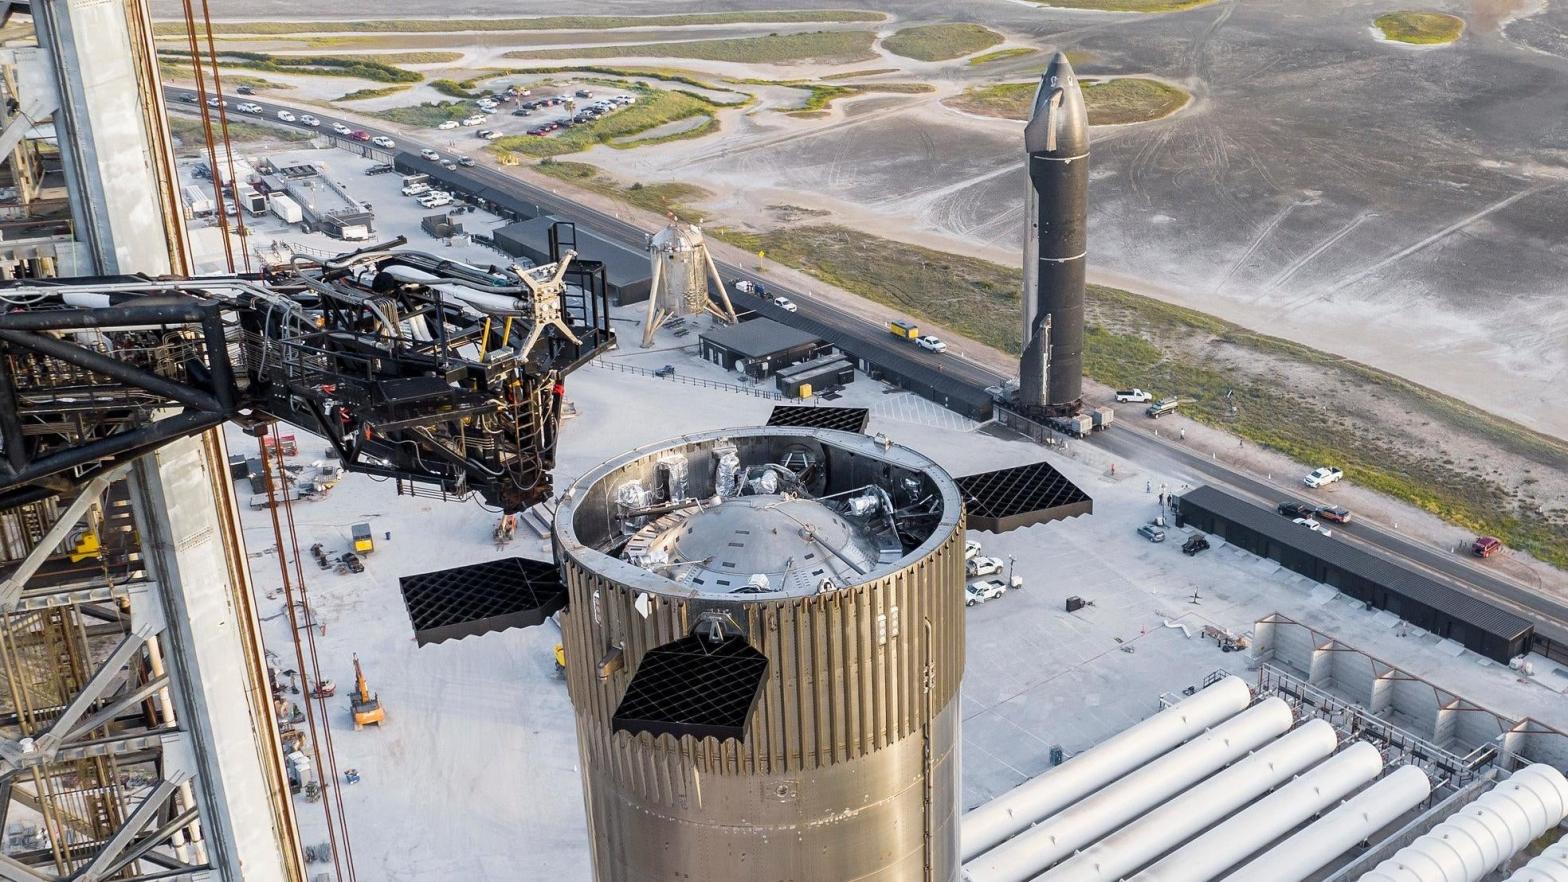 The Super Heavy Booster 7 prototype at the launch mount, with Starship 24 upper stage in the background.  (Photo: SpaceX)